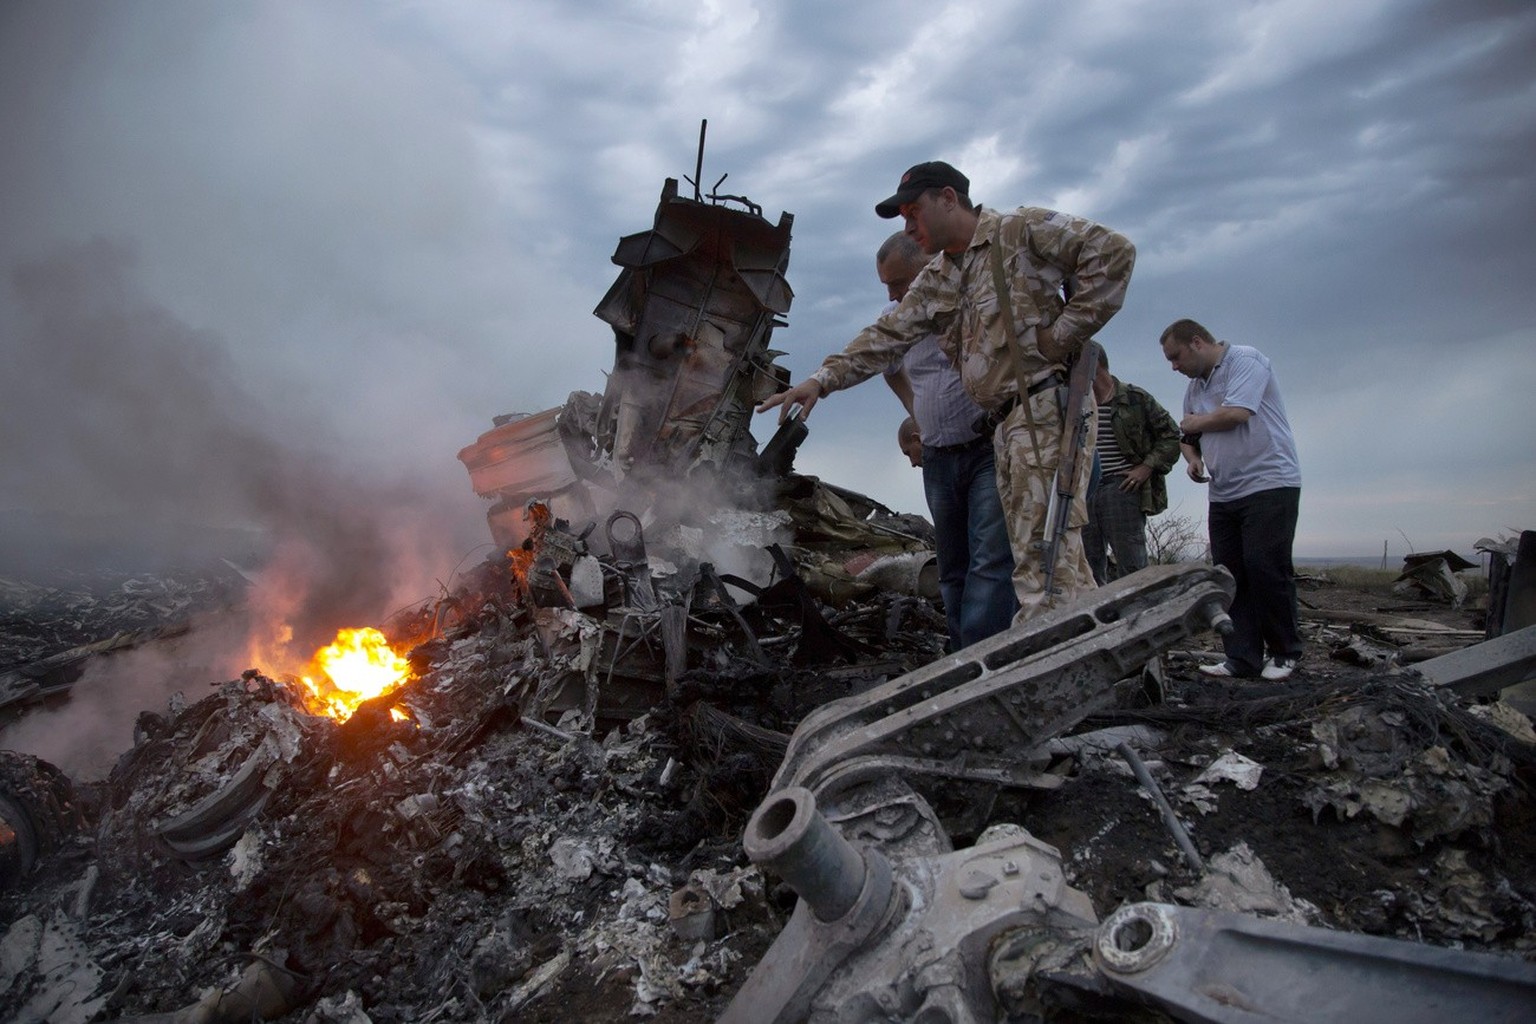 FILE - People inspect the crash site of a passenger plane near the village of Grabovo, Ukraine, on July 17, 2014. A Dutch court on Thursday is set to deliver verdicts in the long-running trial of thre ...